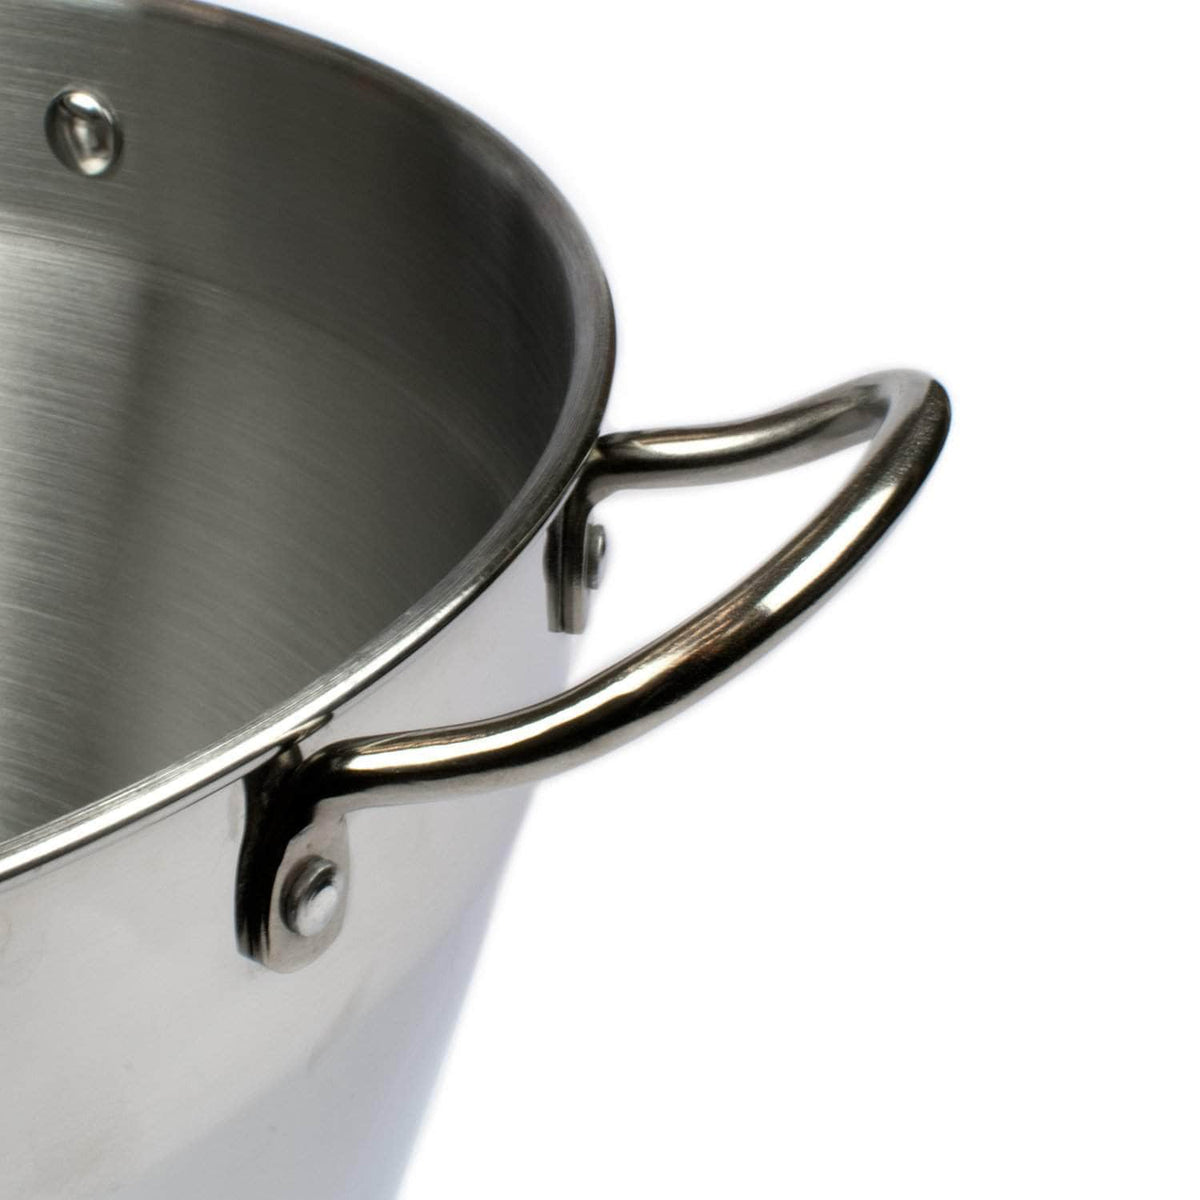 *New* Stainless steel Maslin pan